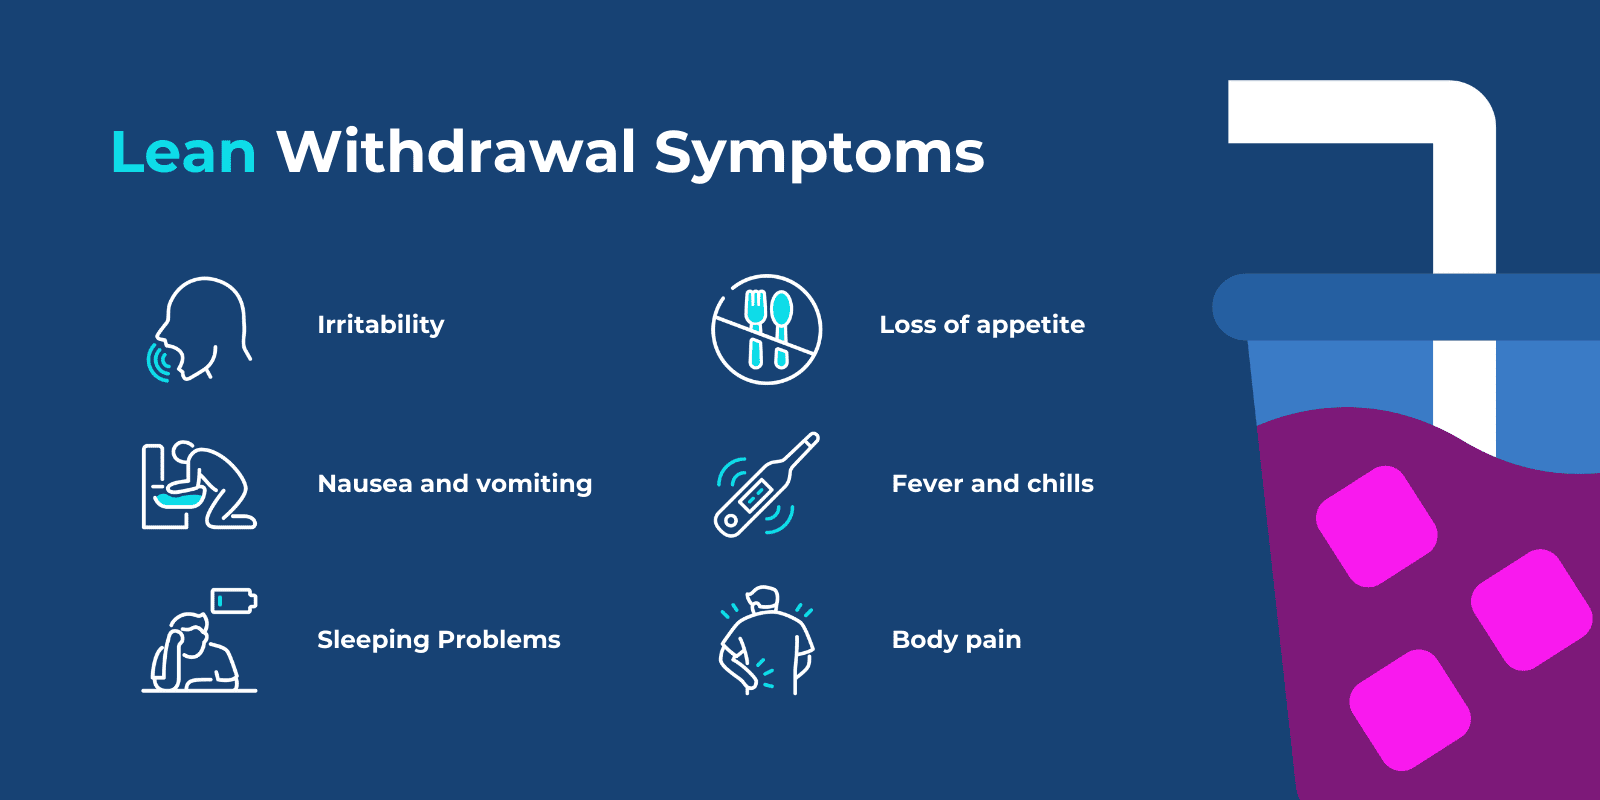 Lean Withdrawal Symptoms listed out with relevant icons next to big illustration of lean